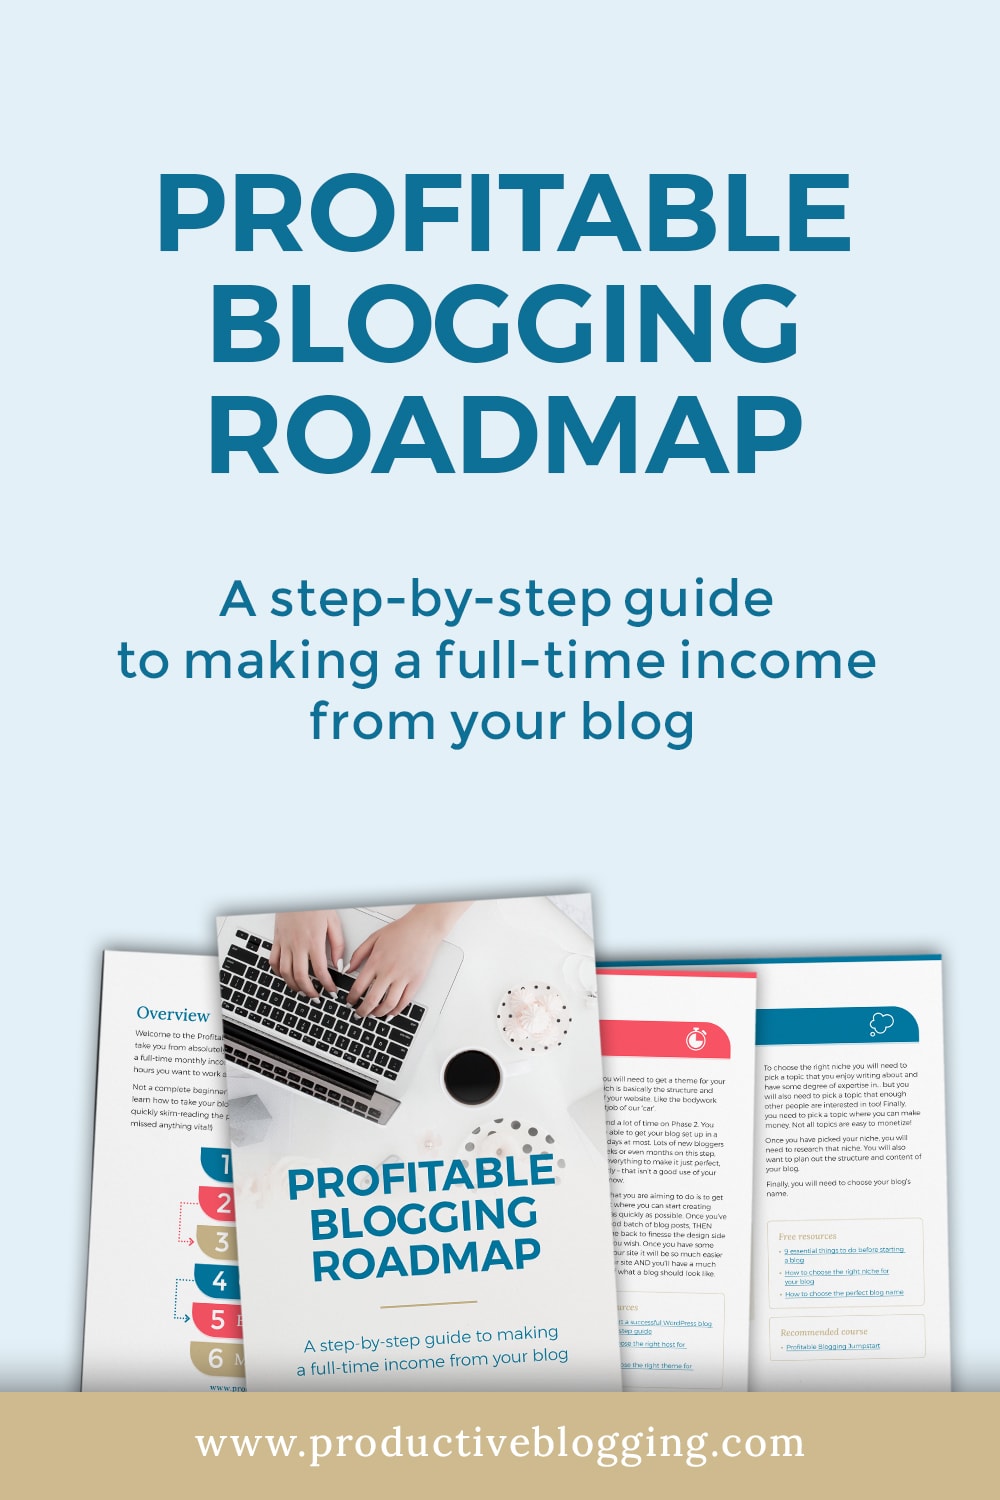 Want to make money blogging? The good news is making money from a blog is easier than you think. All you need is a good roadmap! My Profitable Blogging Roadmap is a step-by-step guide to making a full time income from your blog. It comes from years of blogging experience, research and experimentation… A journey that has led me to where I am today - a six figure blogger! #makemoneyblogging #moneymakingblog #profitableblog #profitableblogging #bloggingroadmap #sixfigureblogger #productiveblogging